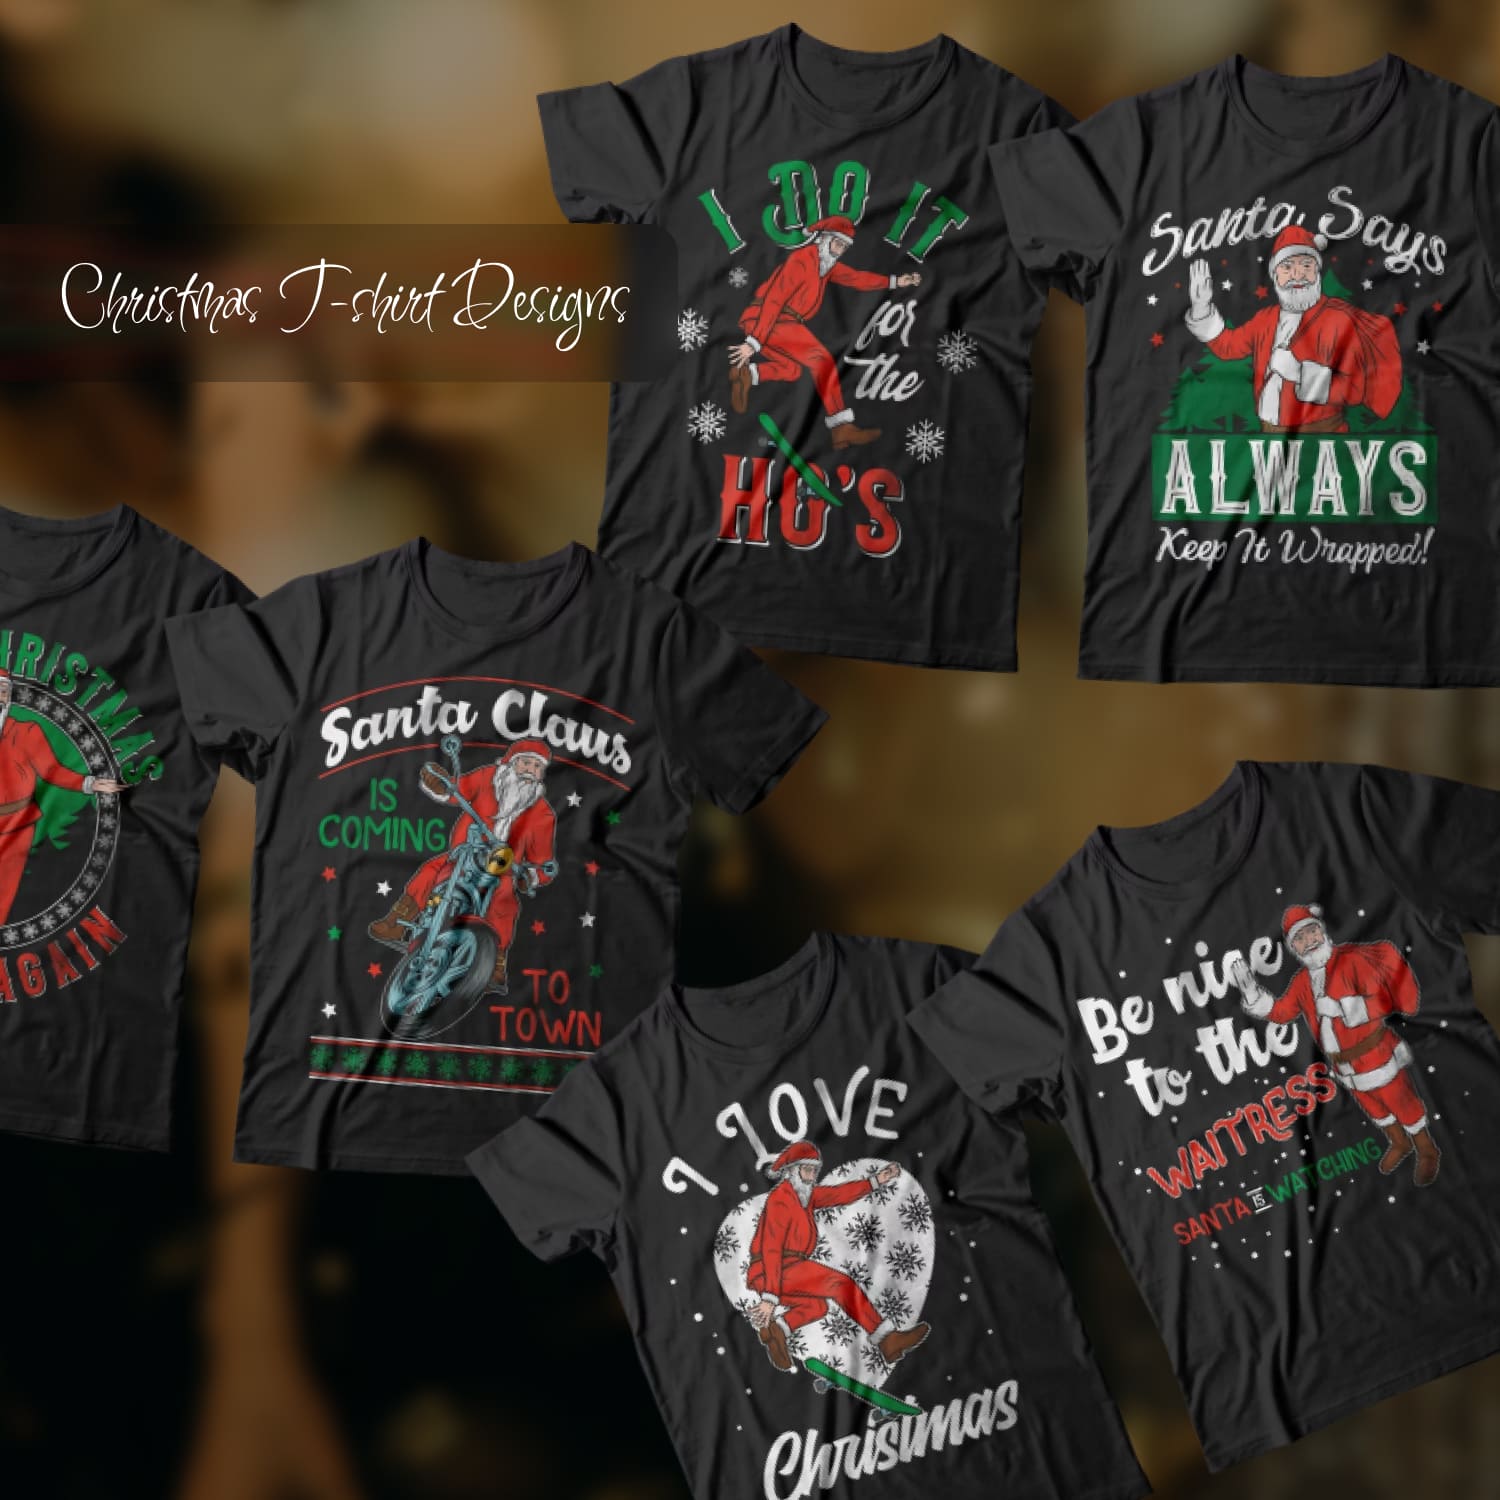 Collection of black t-shirts with bright prints on the New Year theme.